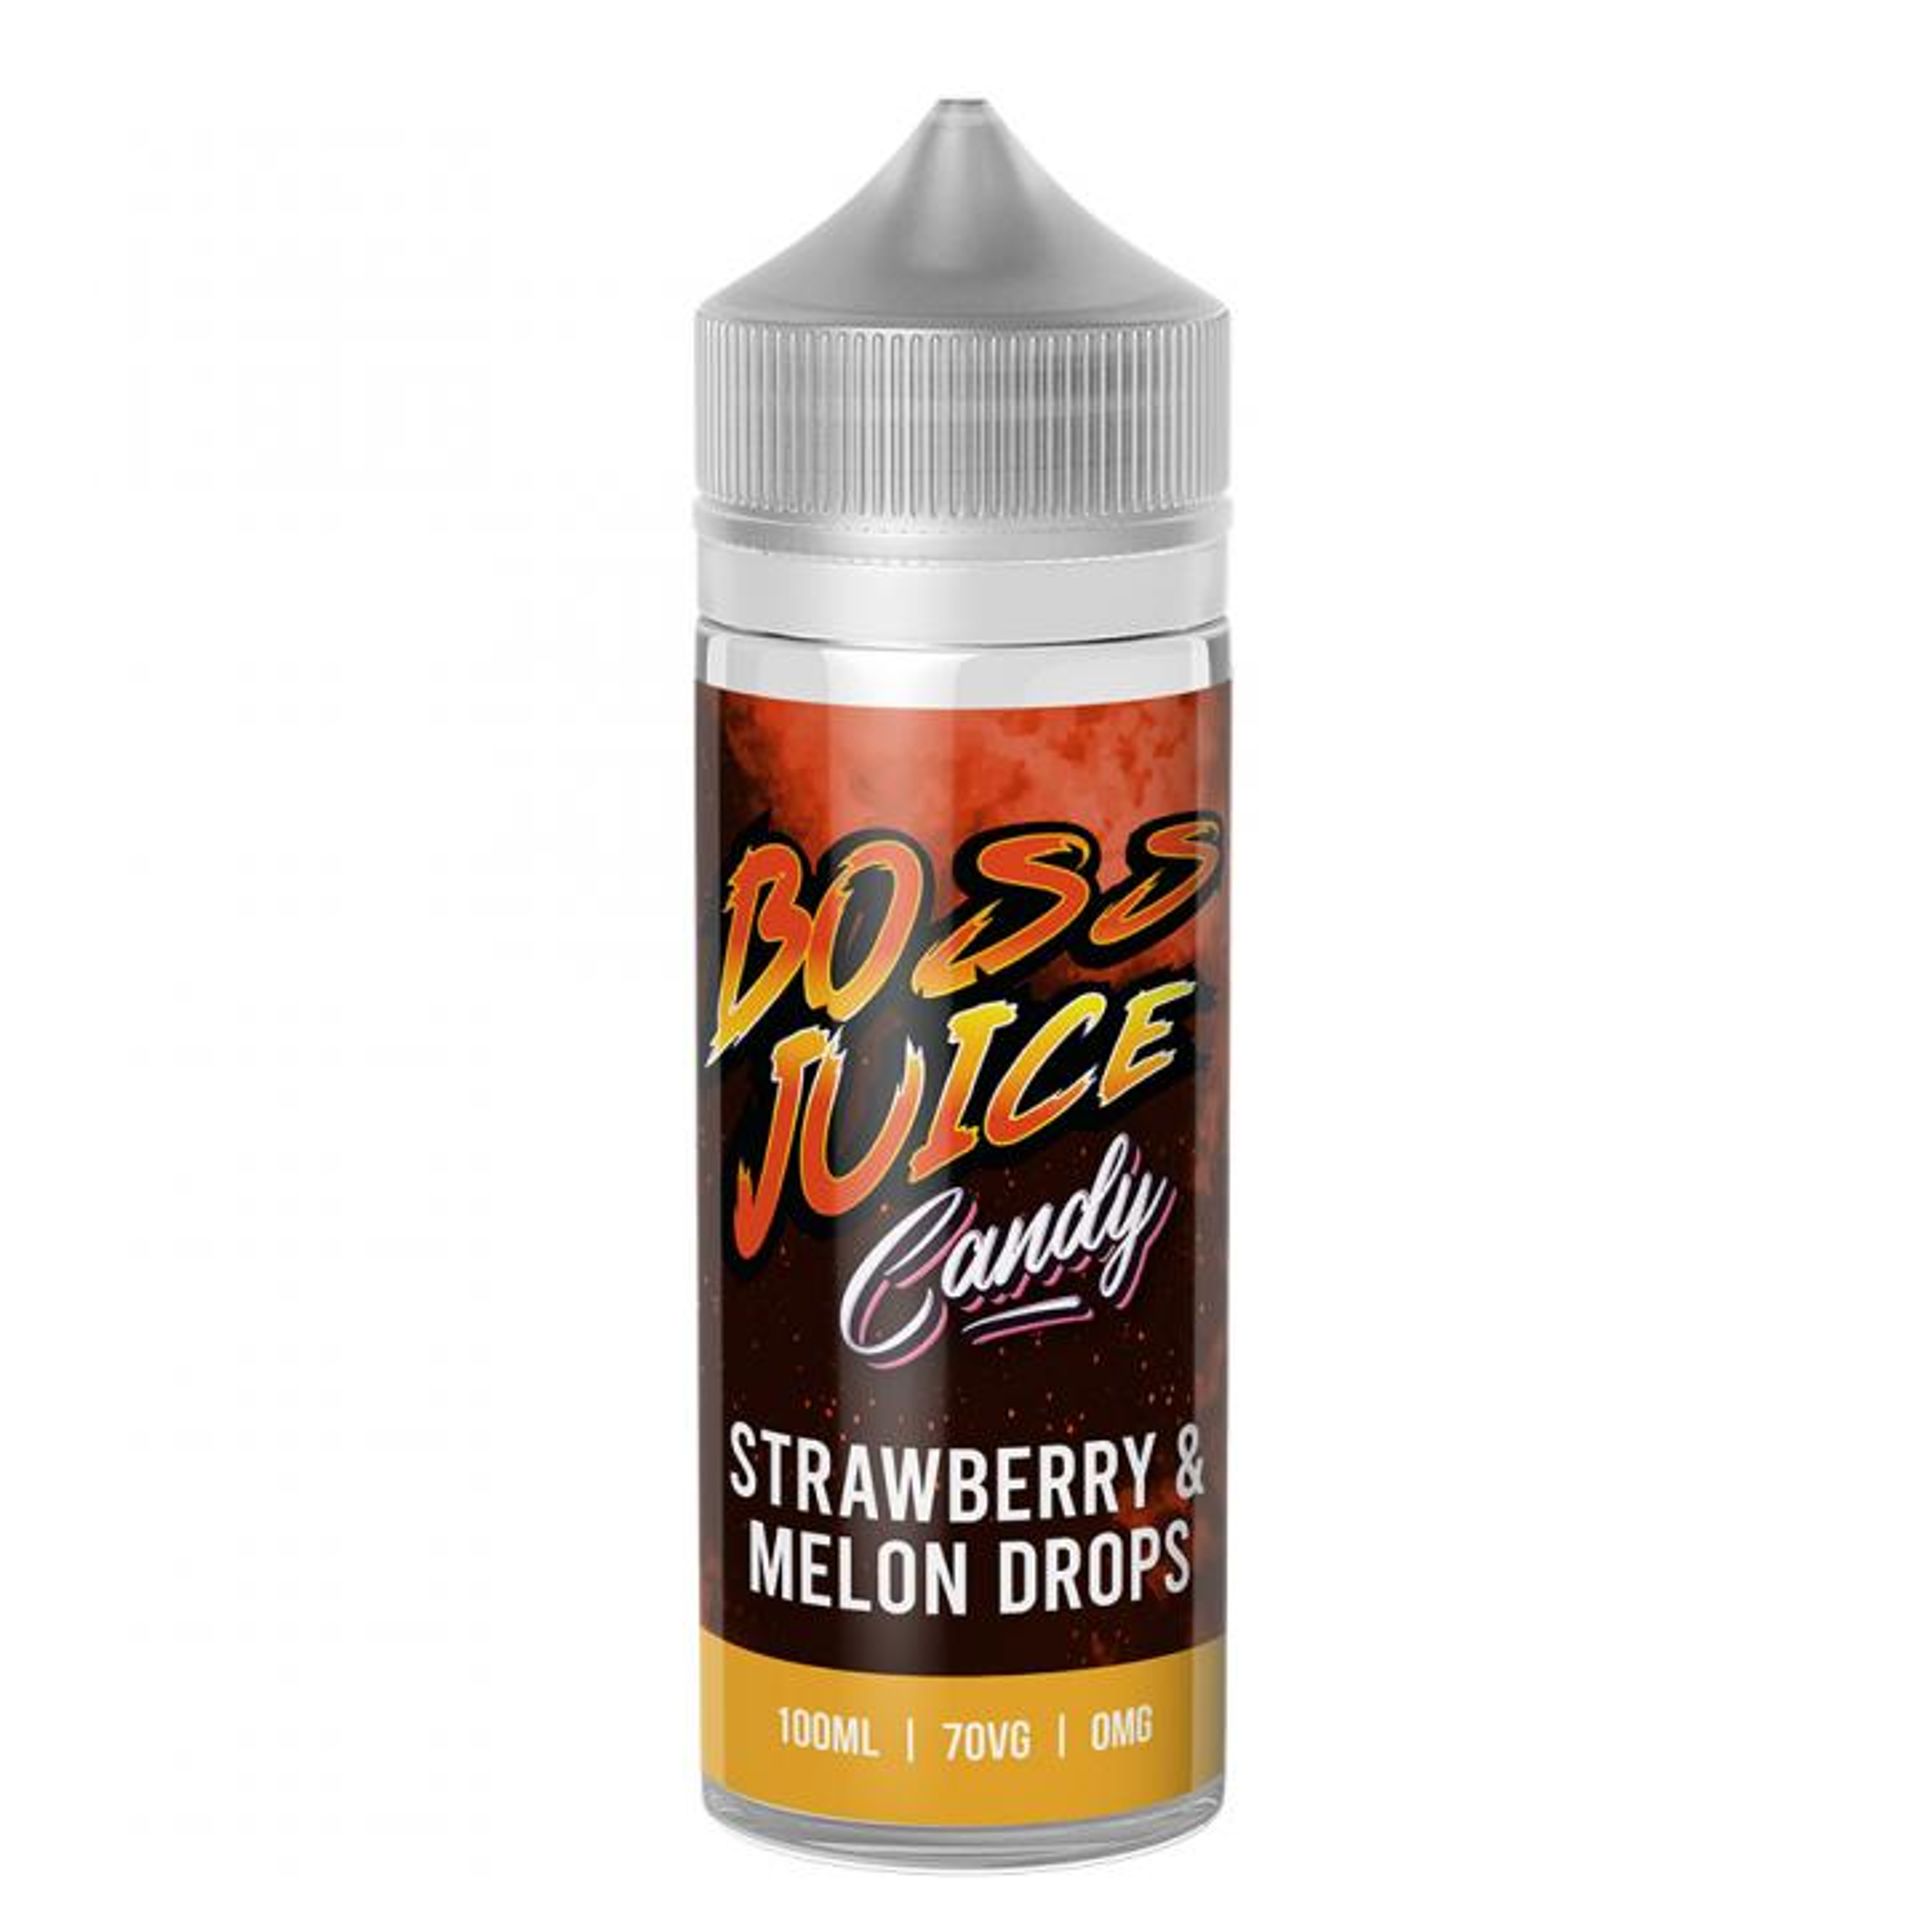 Image of Strawberry & Melon Drops by Boss Juice